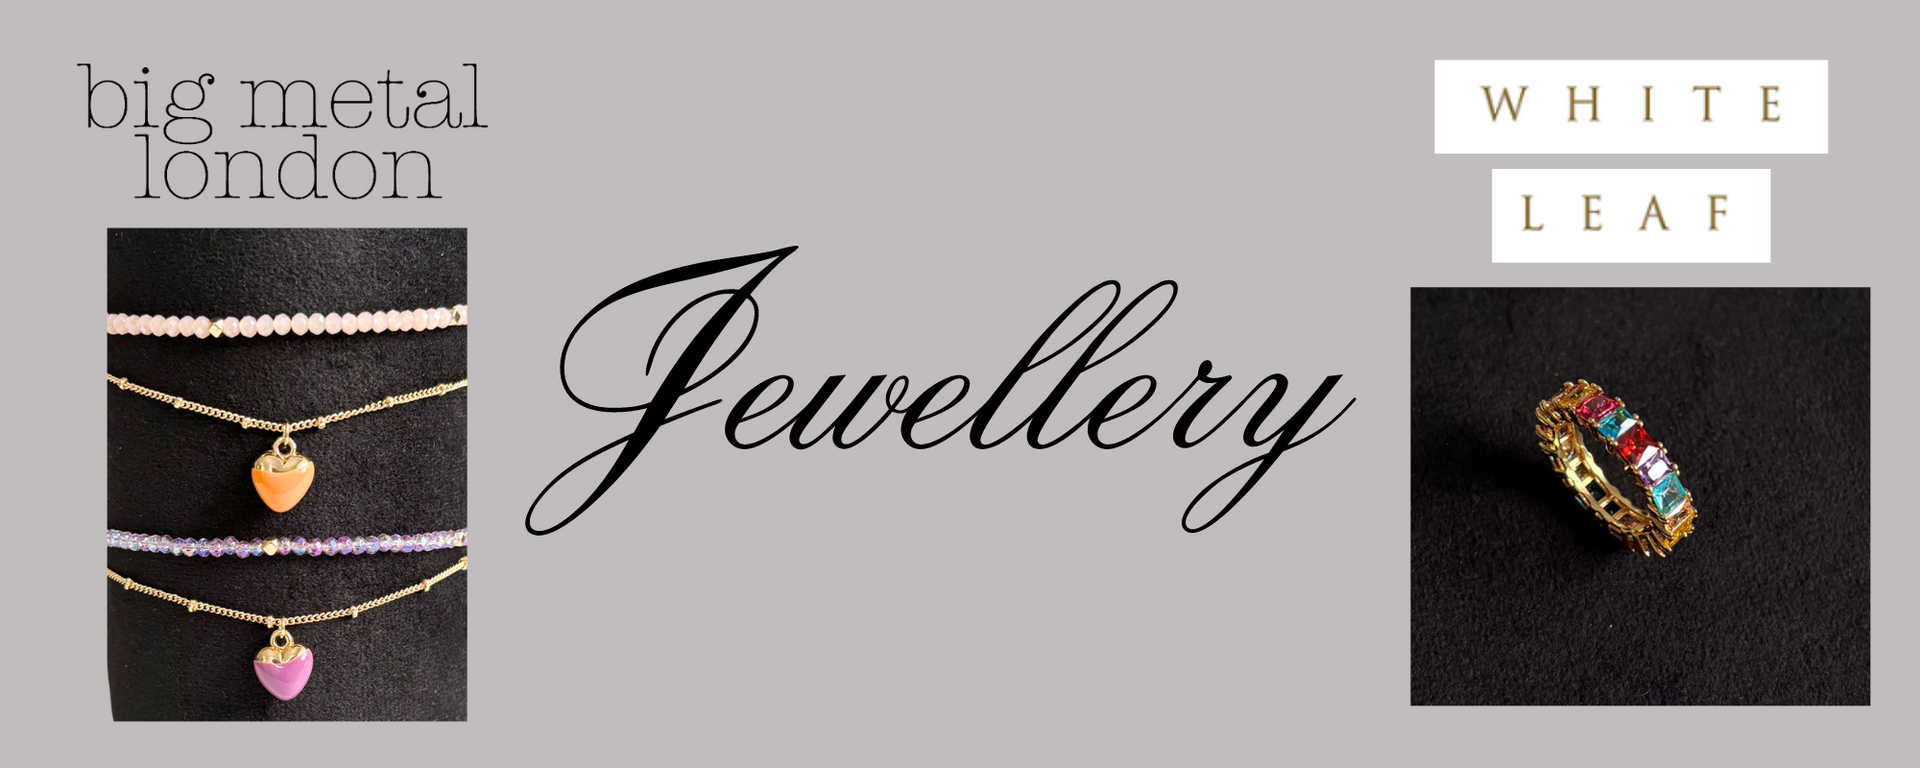 Jewellery - From Top Brands such as Big Metal London.